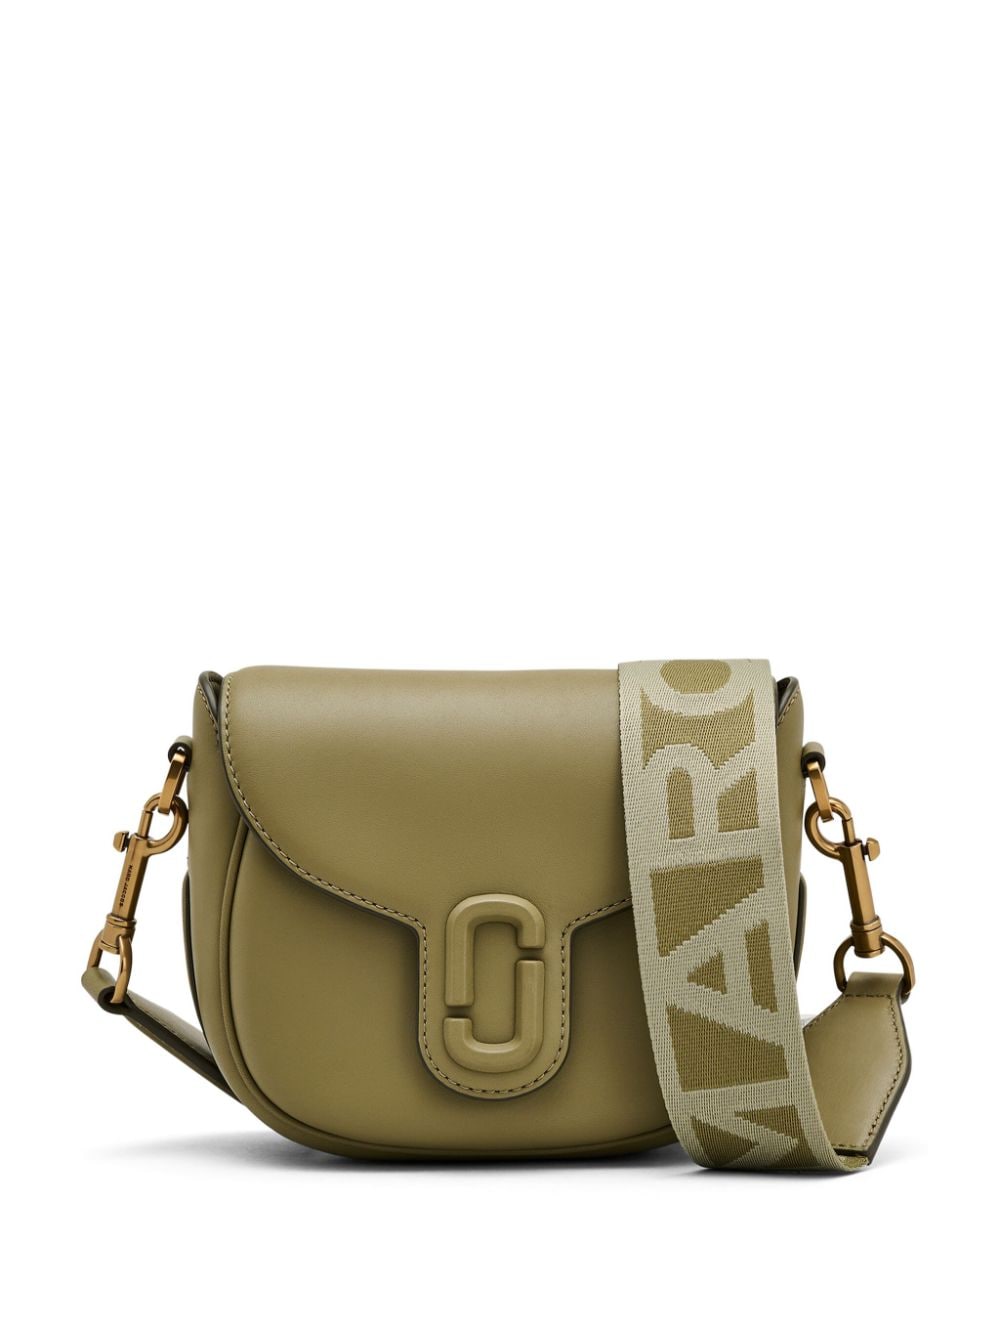 Marc Jacobs The J Marc Small saddle bag - Green von Marc Jacobs